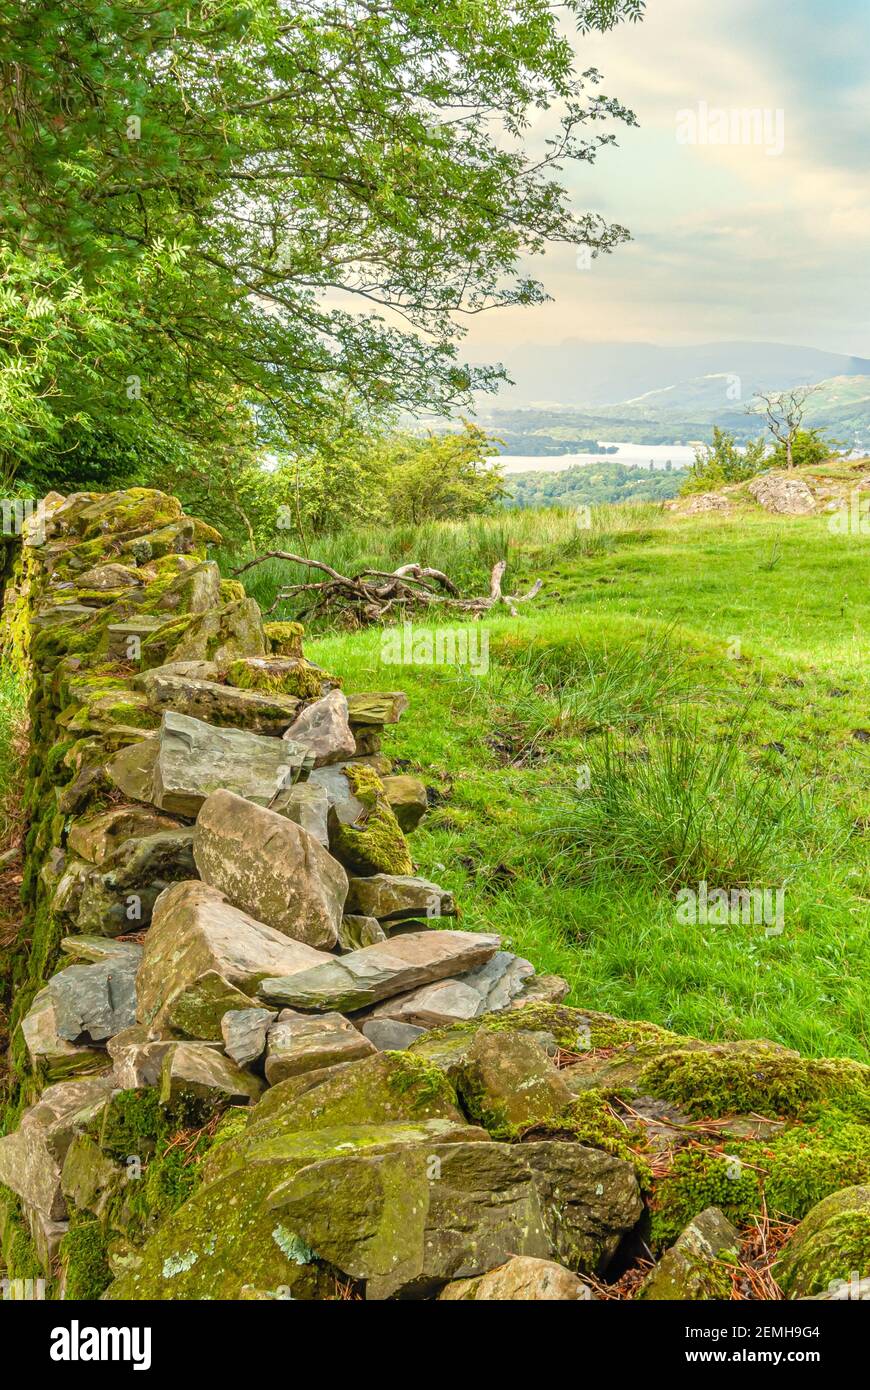 Dry stone wall in a landscape at the Lake District National Park, Cumbria, England, UK Stock Photo